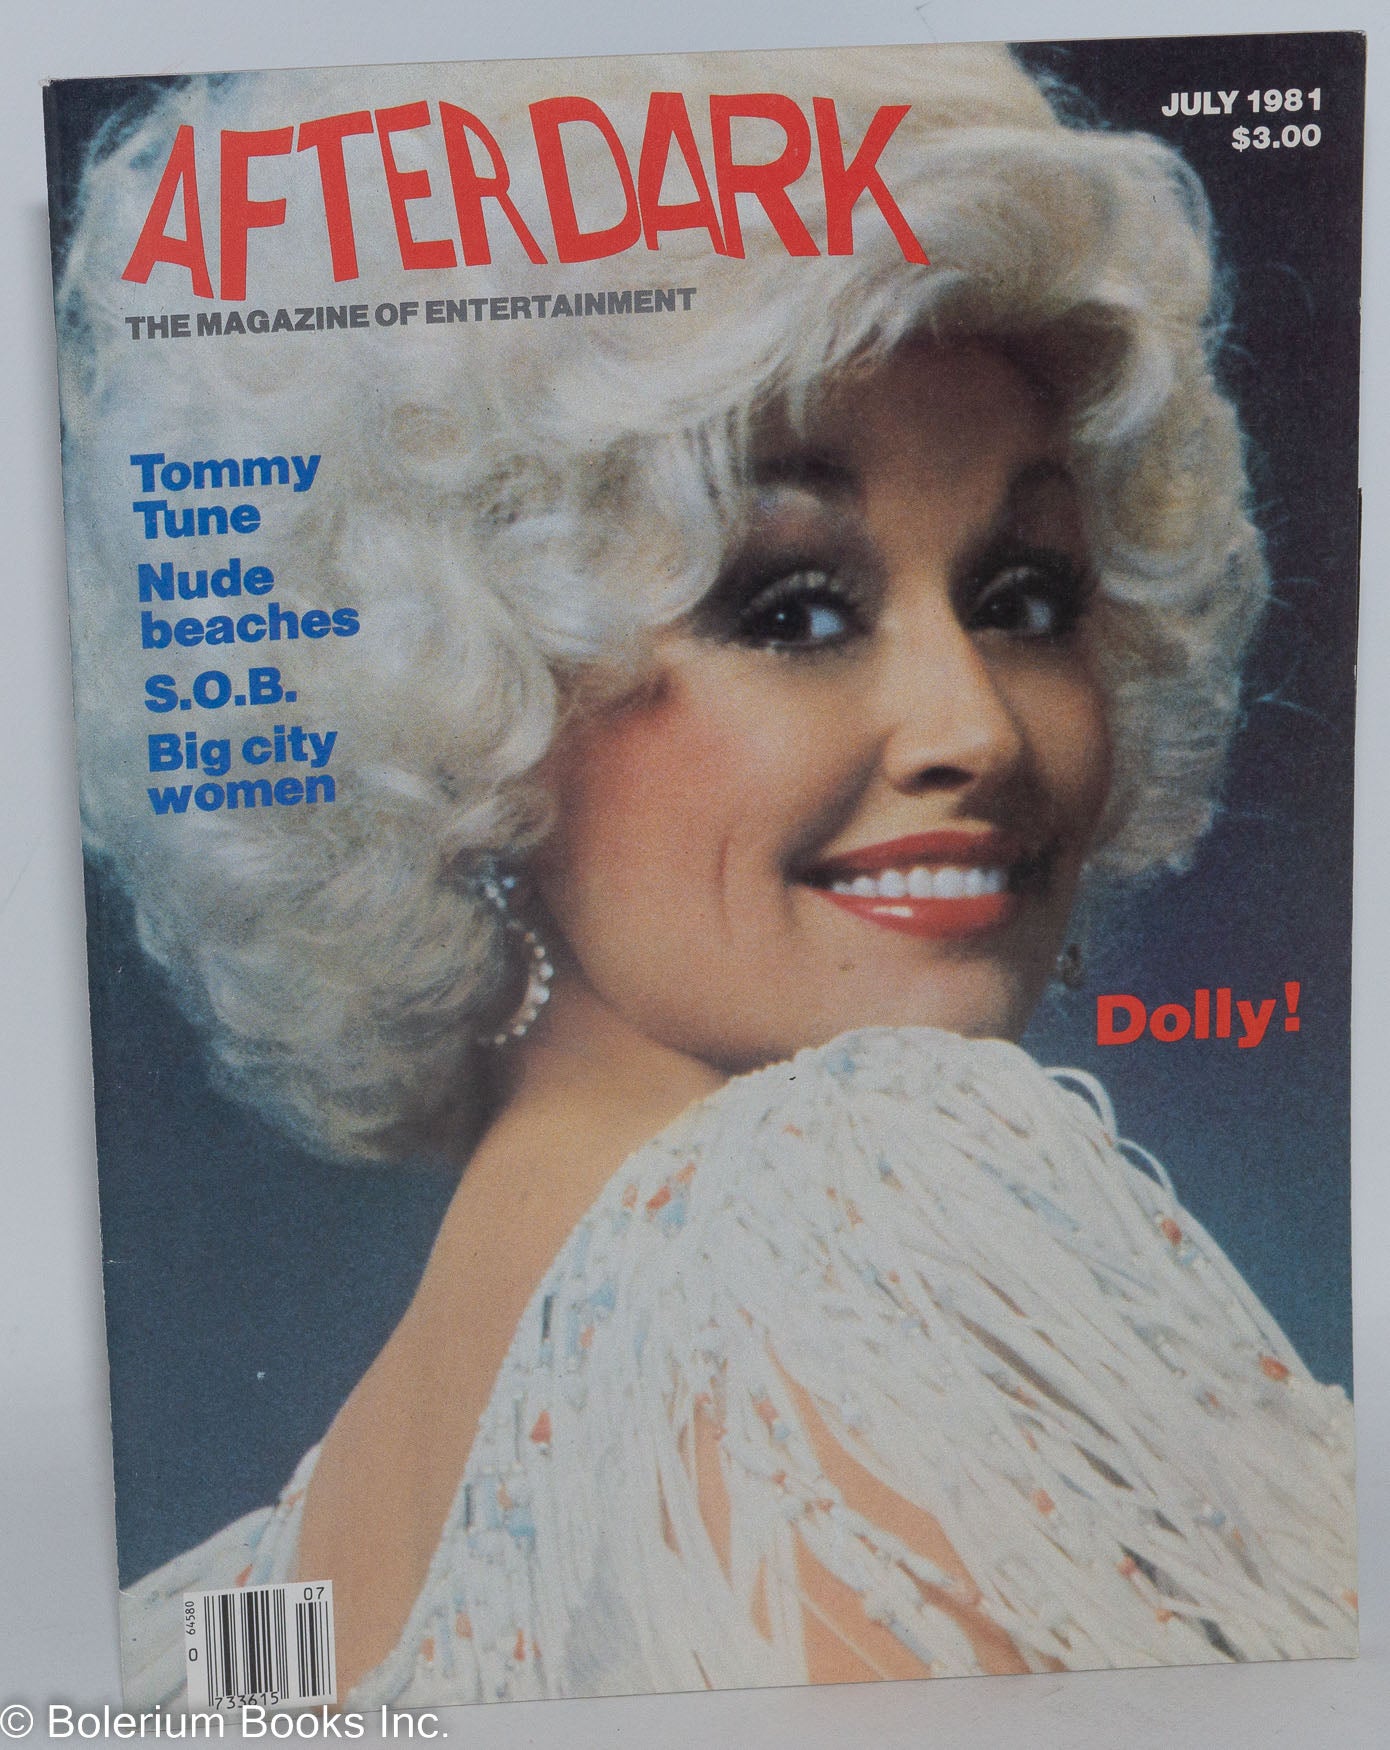 Japanese Nude Beach Onanism - After Dark: the magazine of entertainment; vol. 14, #2, July 1981: Dolly! |  Louis Miele, Dolly Parton Marilyn Stasio, Kenn Duncan